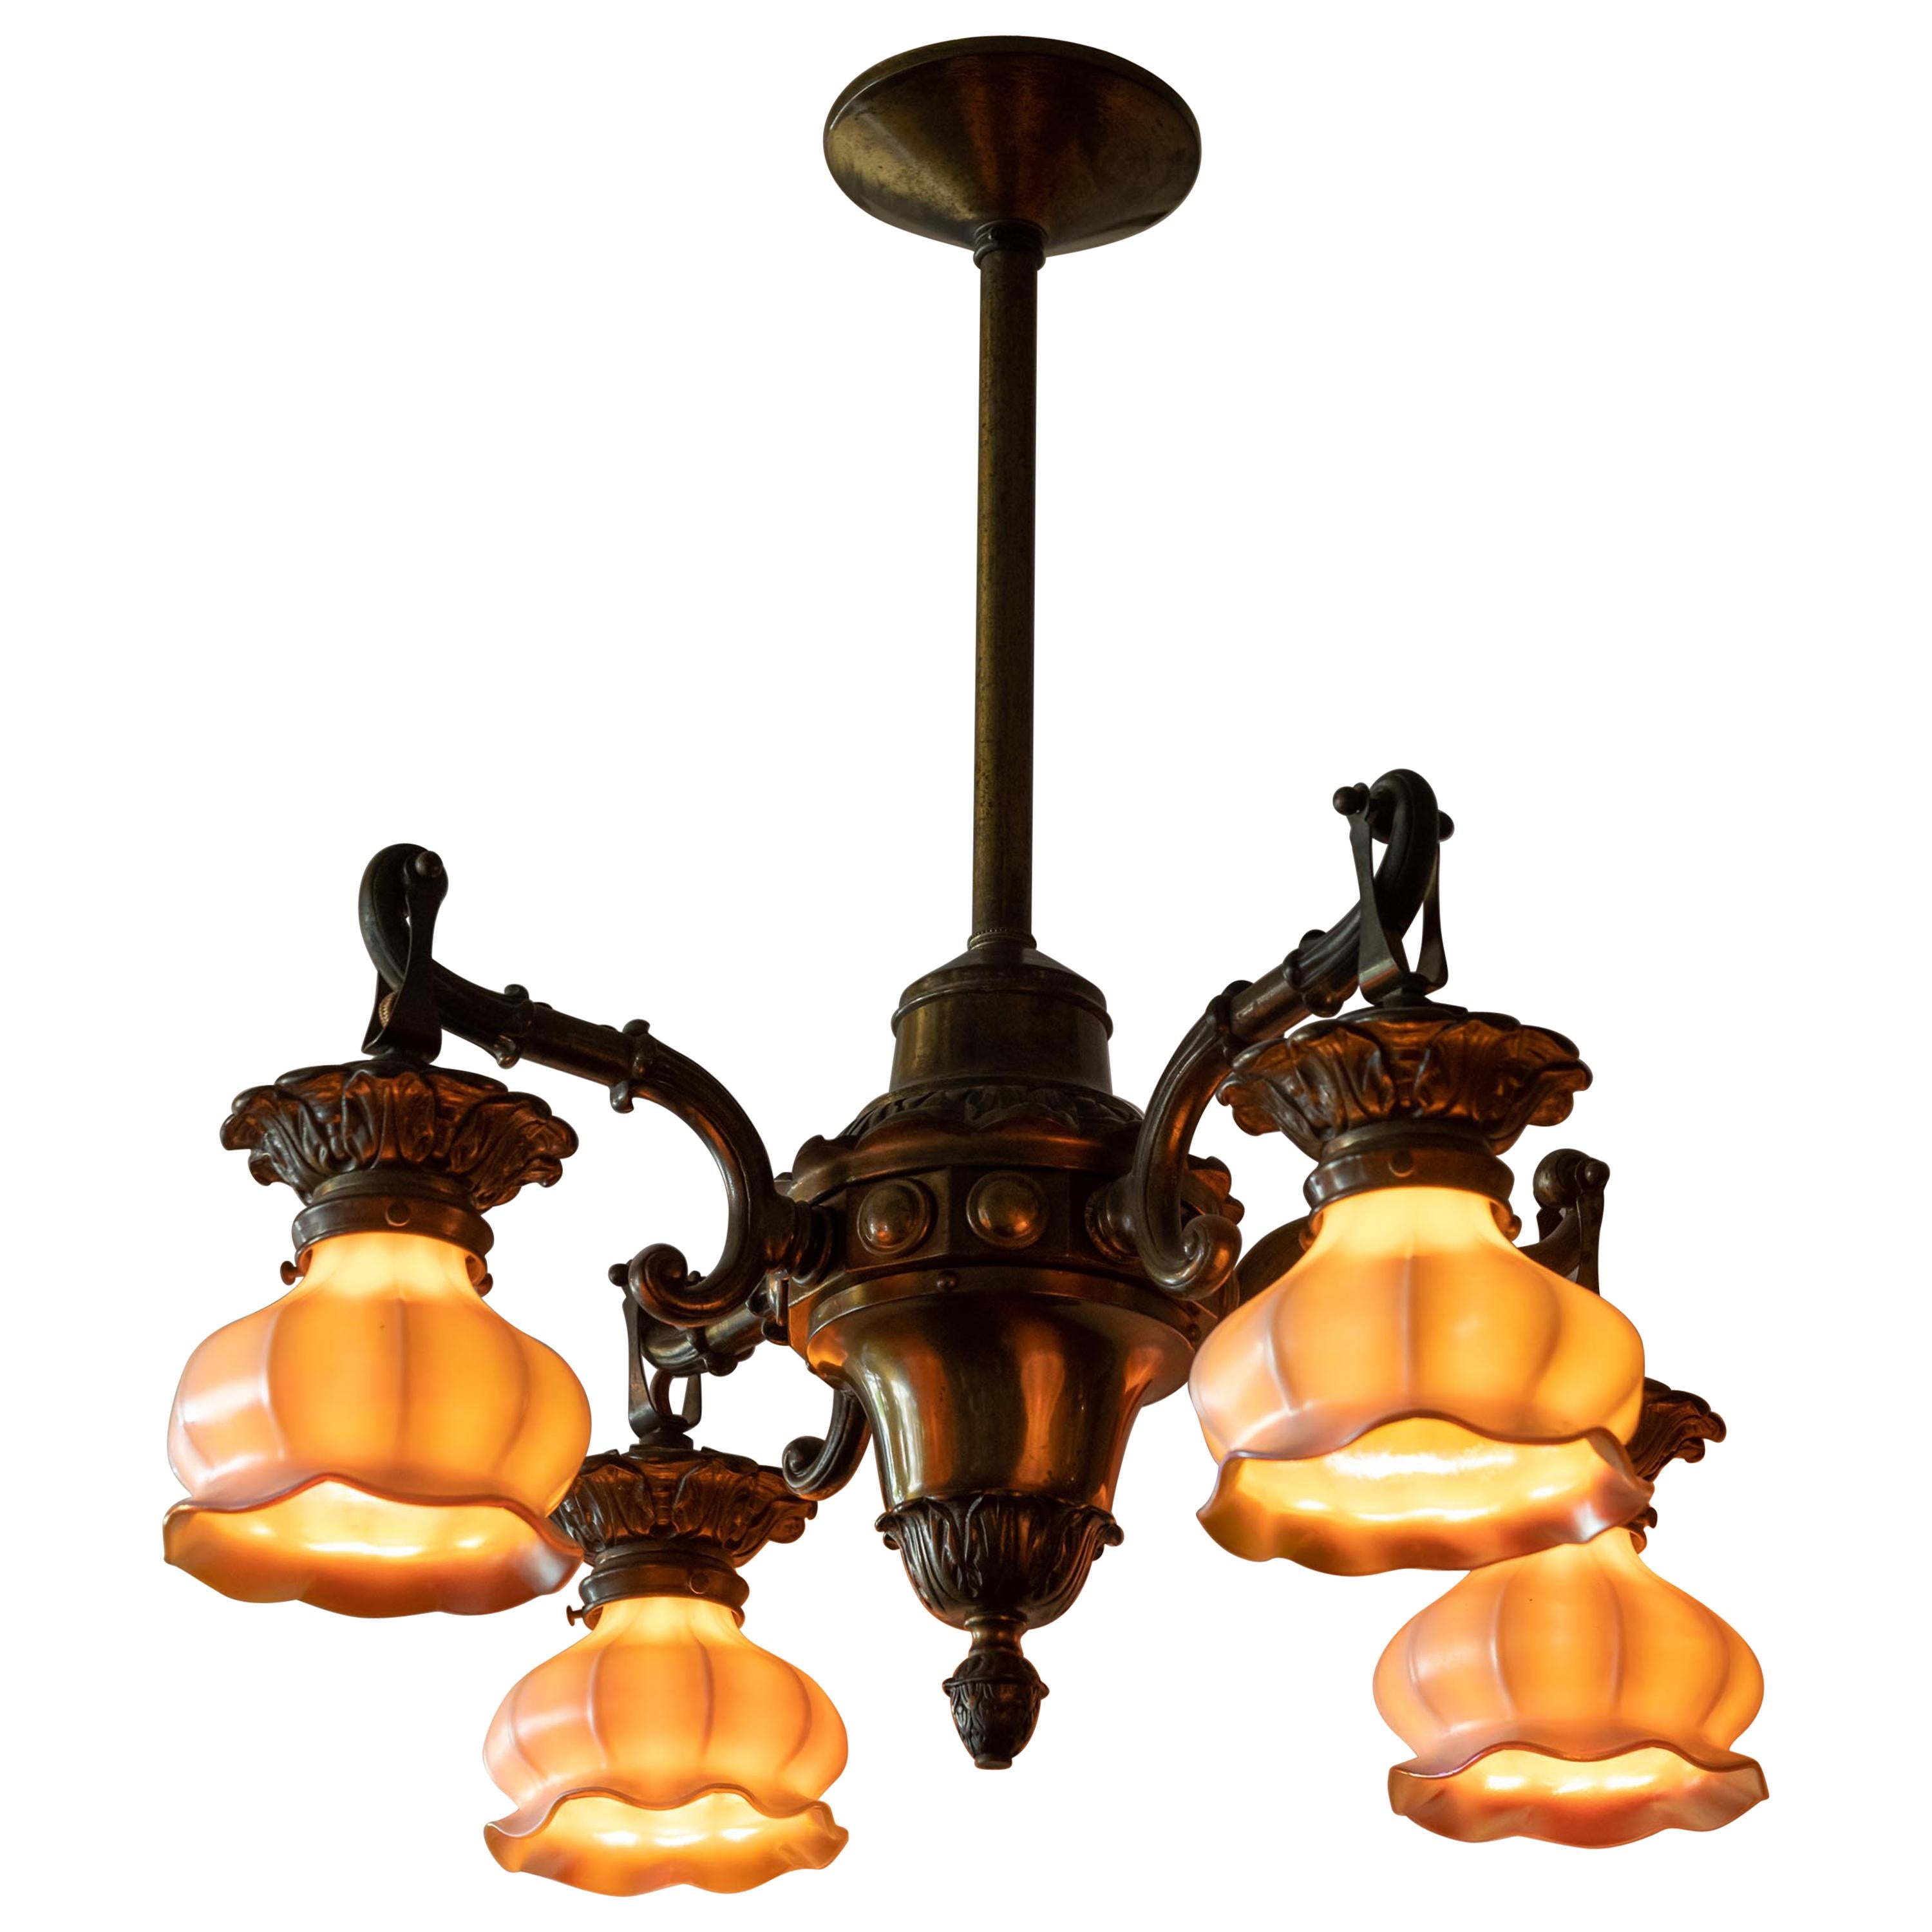 4-Arm Arts and Crafts Chandelier with 4 Steuben Art Glass Shades, circa 1910